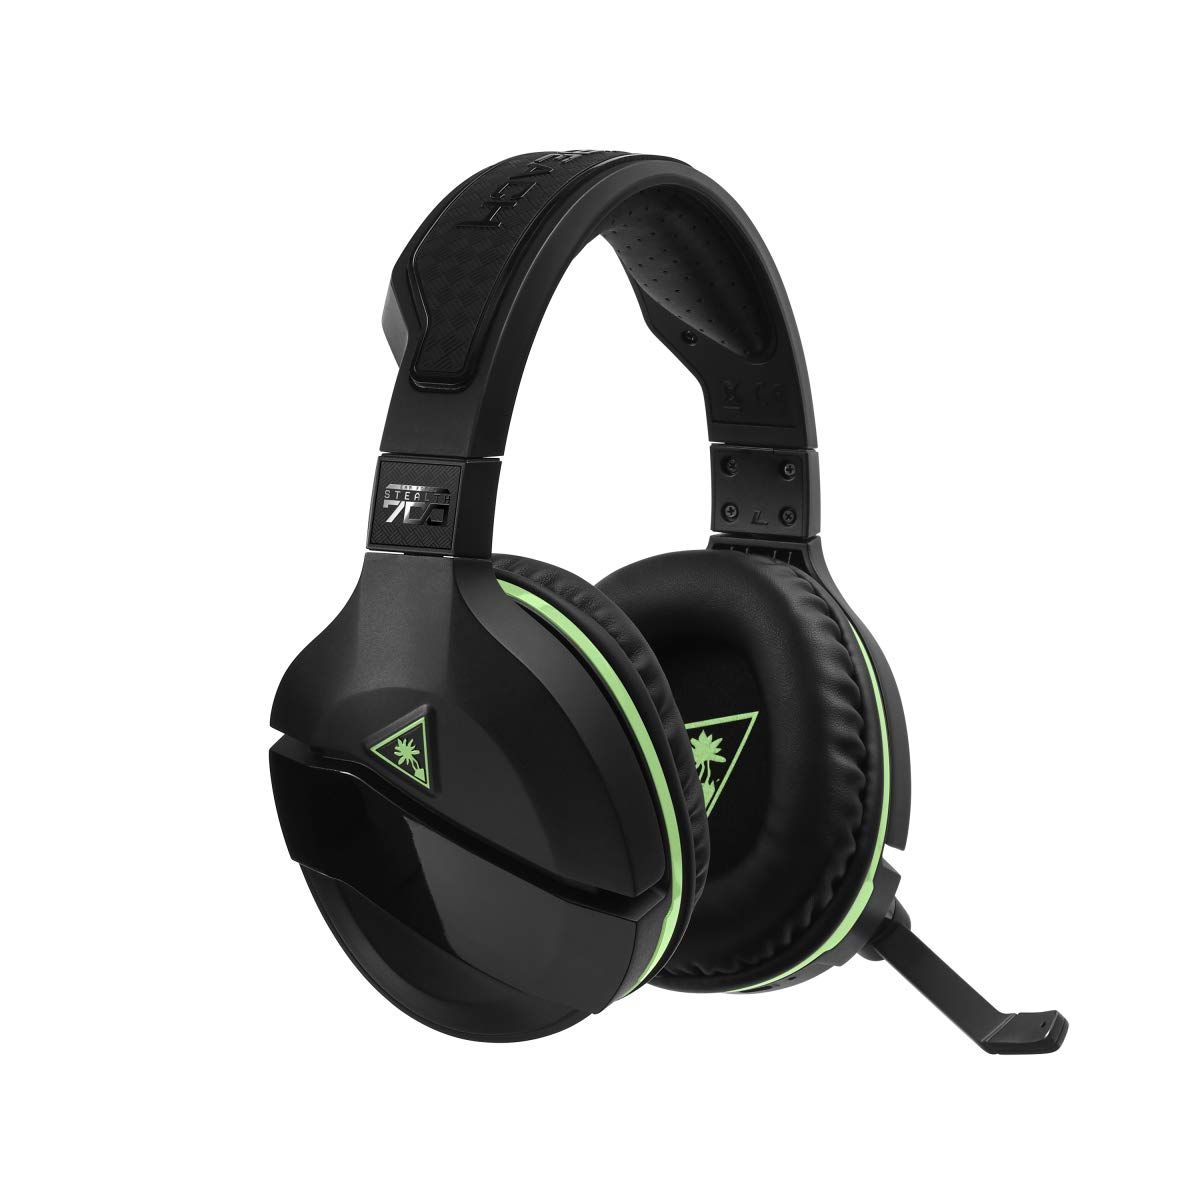 Futuristic Best Gaming Headset For Pc And Xbox 2020 with Futuristic Setup